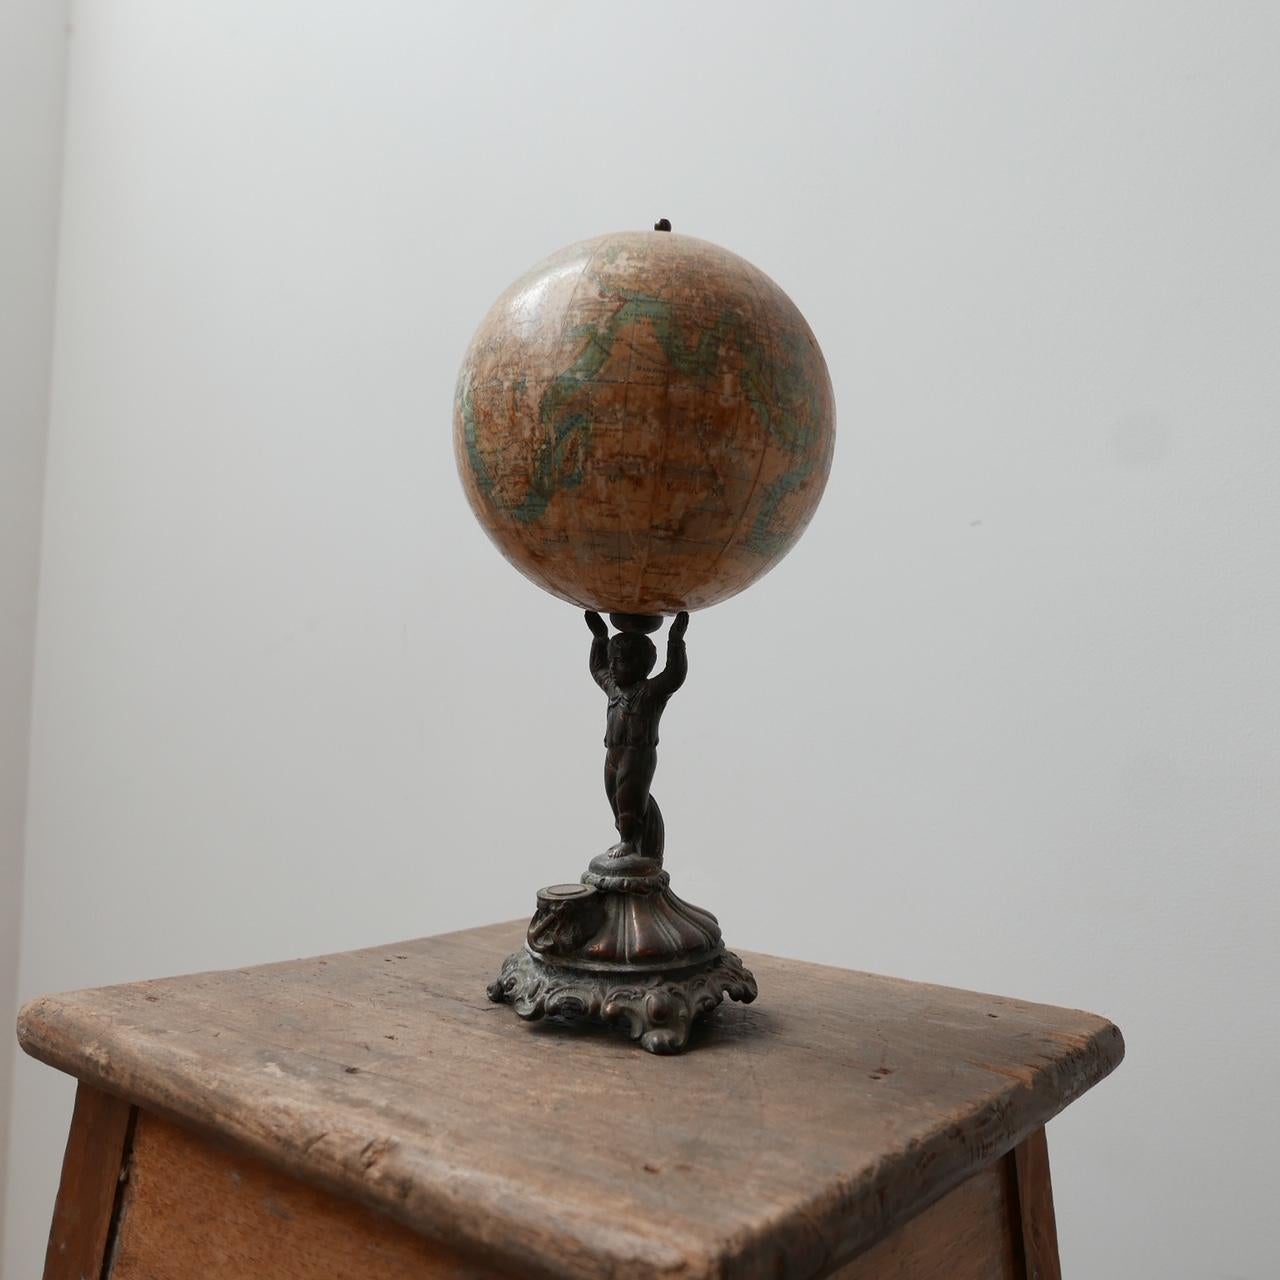 A papier-mache antique globe. 

c1900s, Germany. 

By Ludwig Julius Heymann, Berlin. 

An integrated compass with a young figure of a boy raising the world above his head.

Wear commensurate with age but genererally good condition.